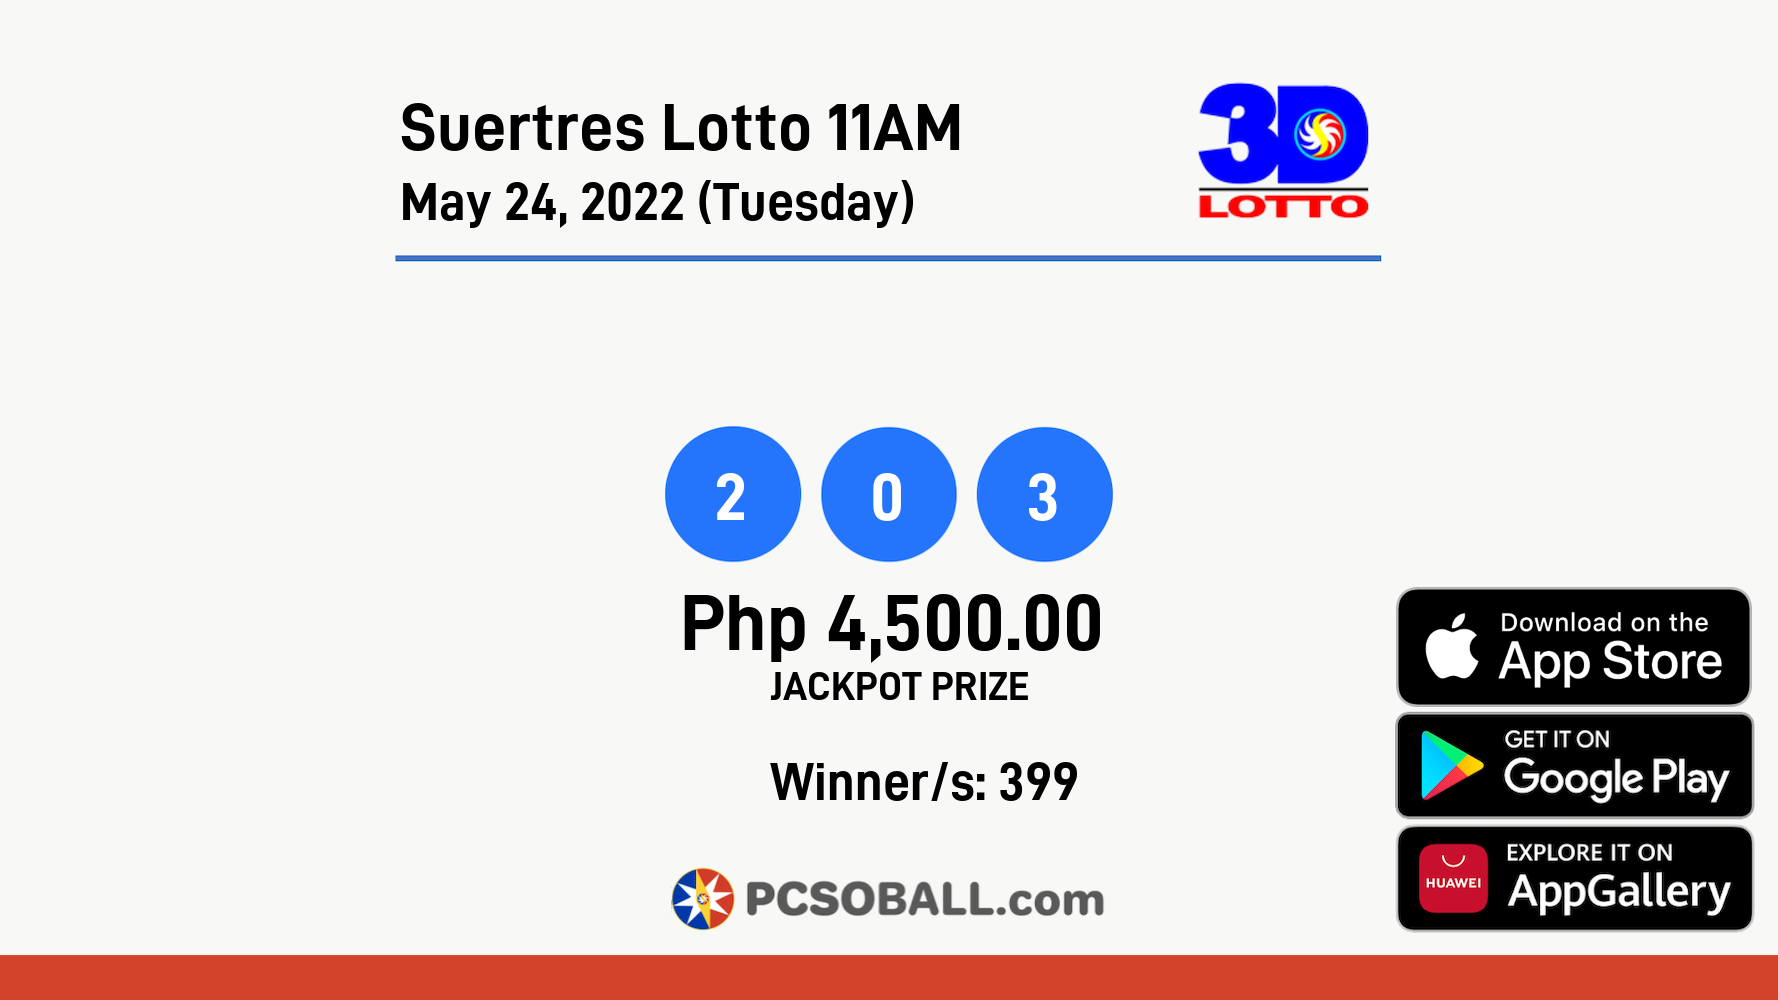 Suertres Lotto 11AM May 24, 2022 (Tuesday) Result